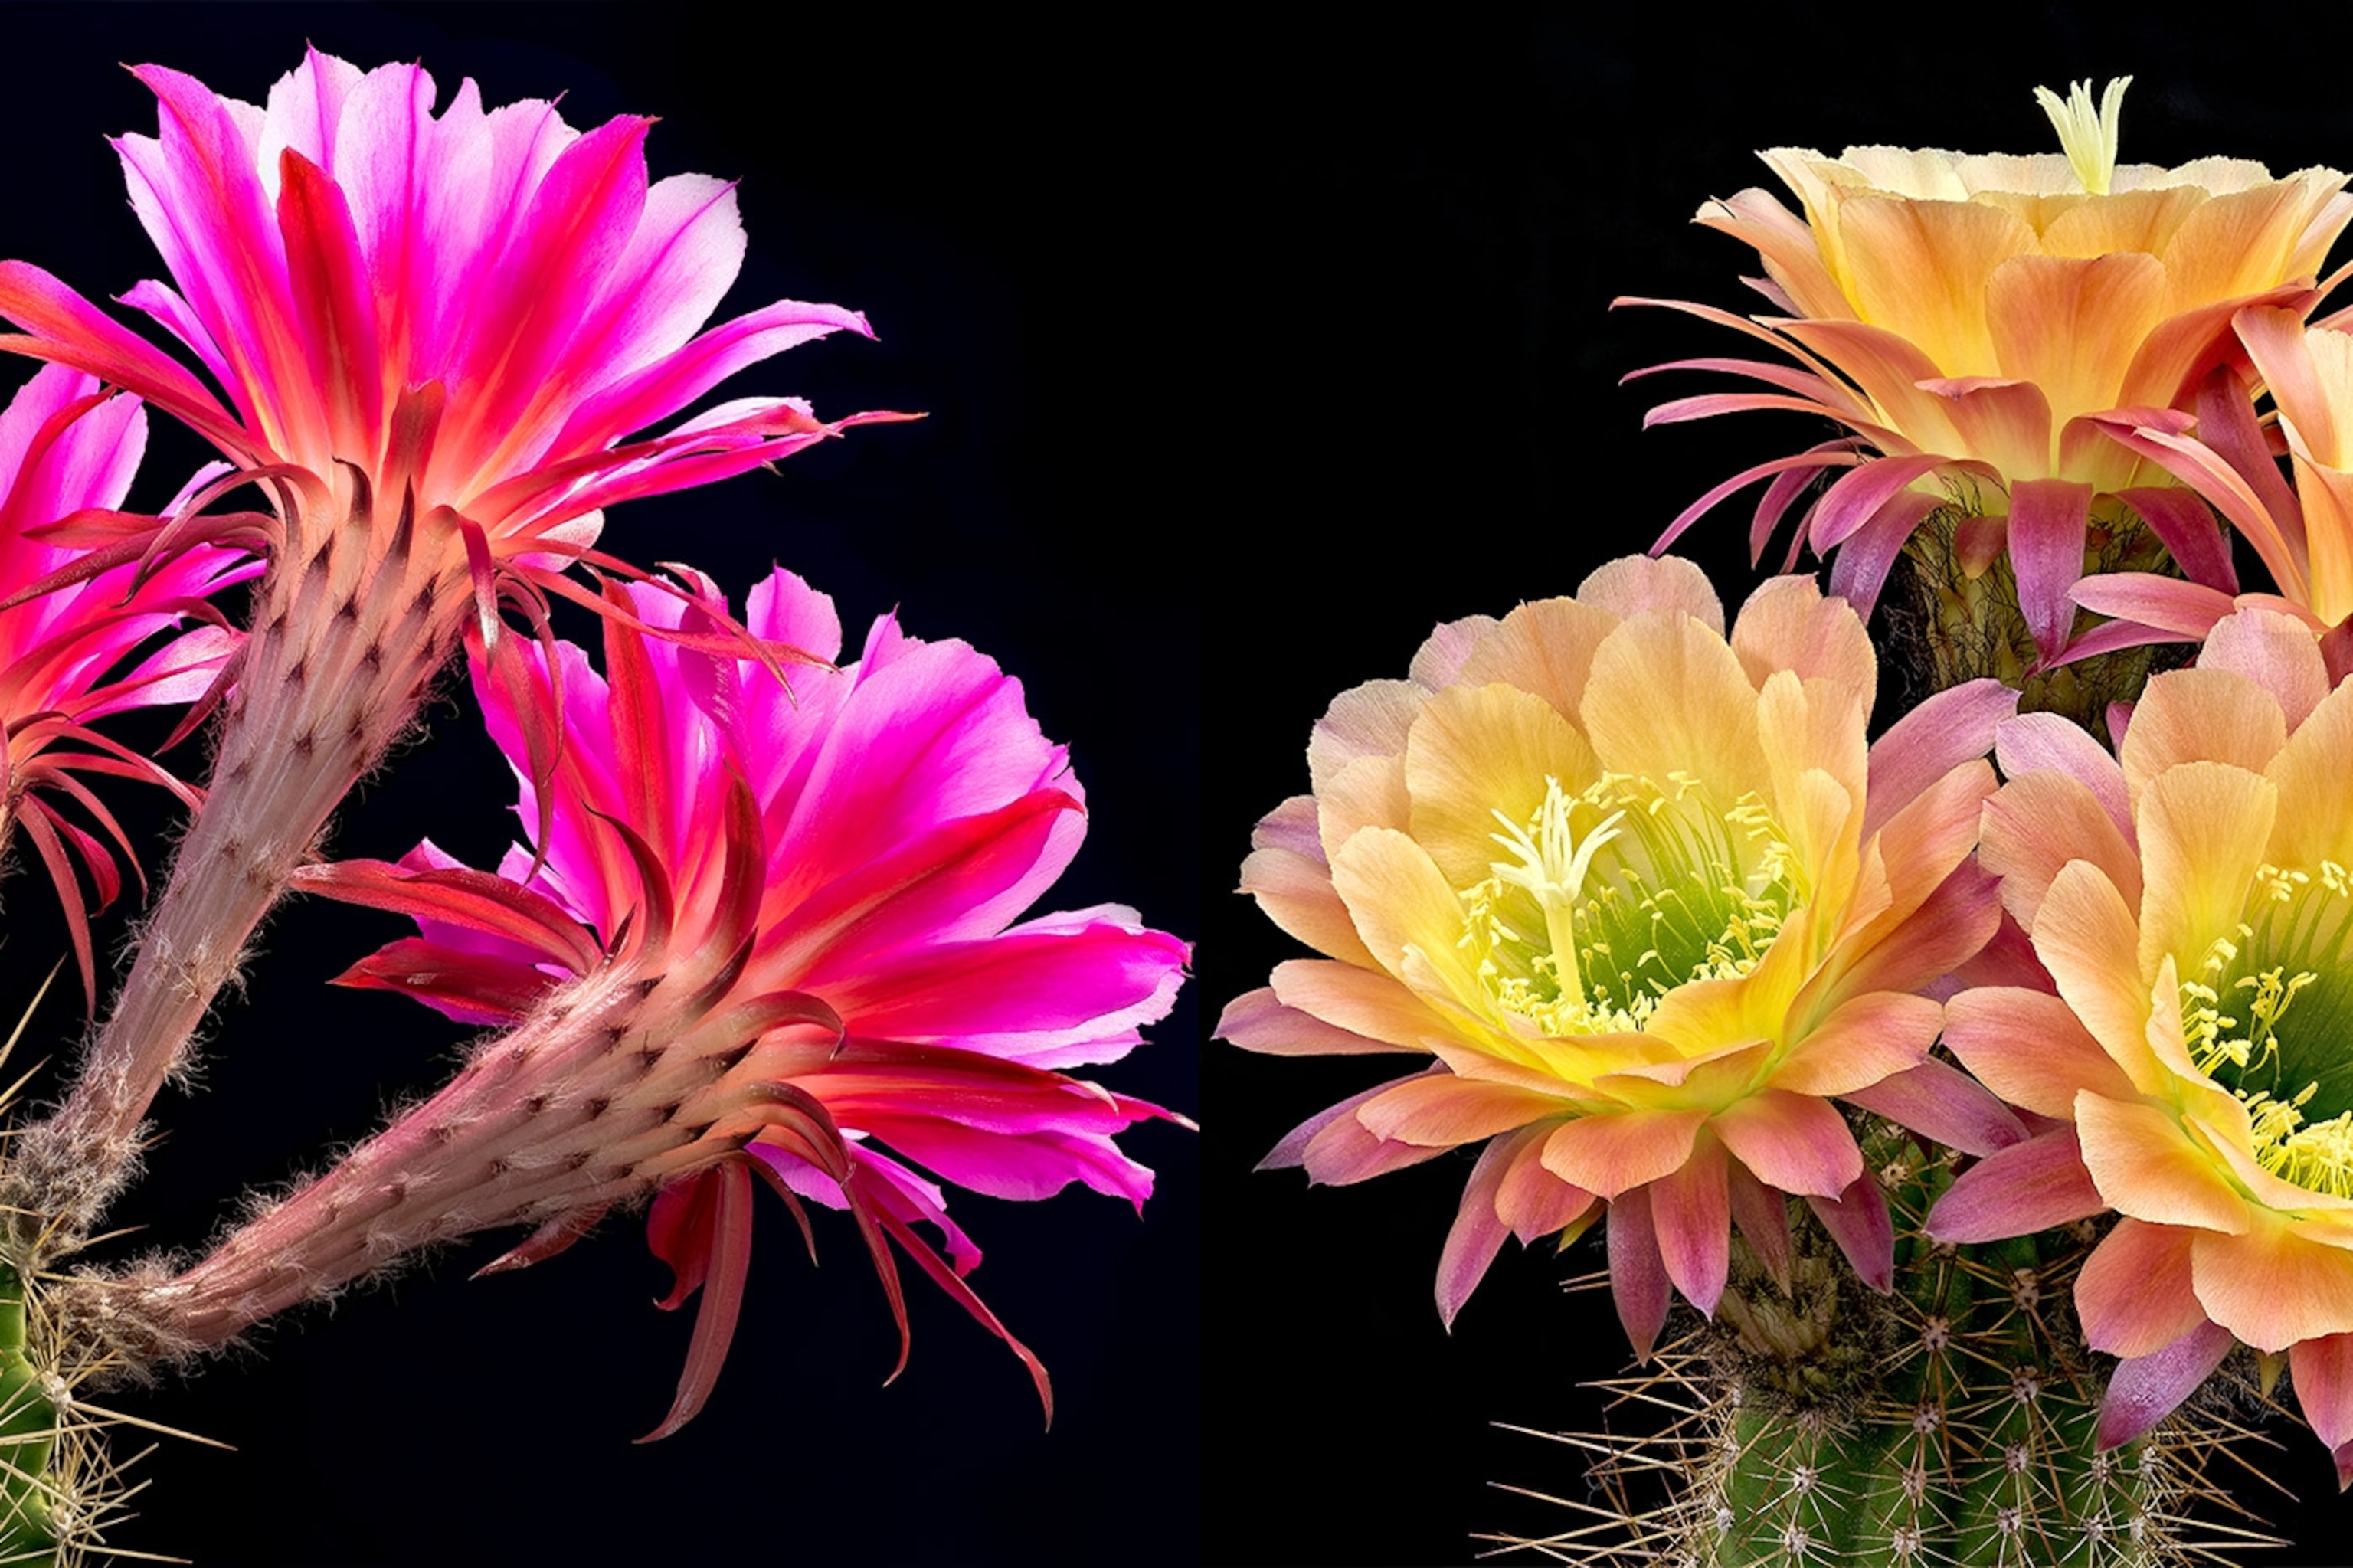 Cactus Flowers: Mother Nature's Fireworks